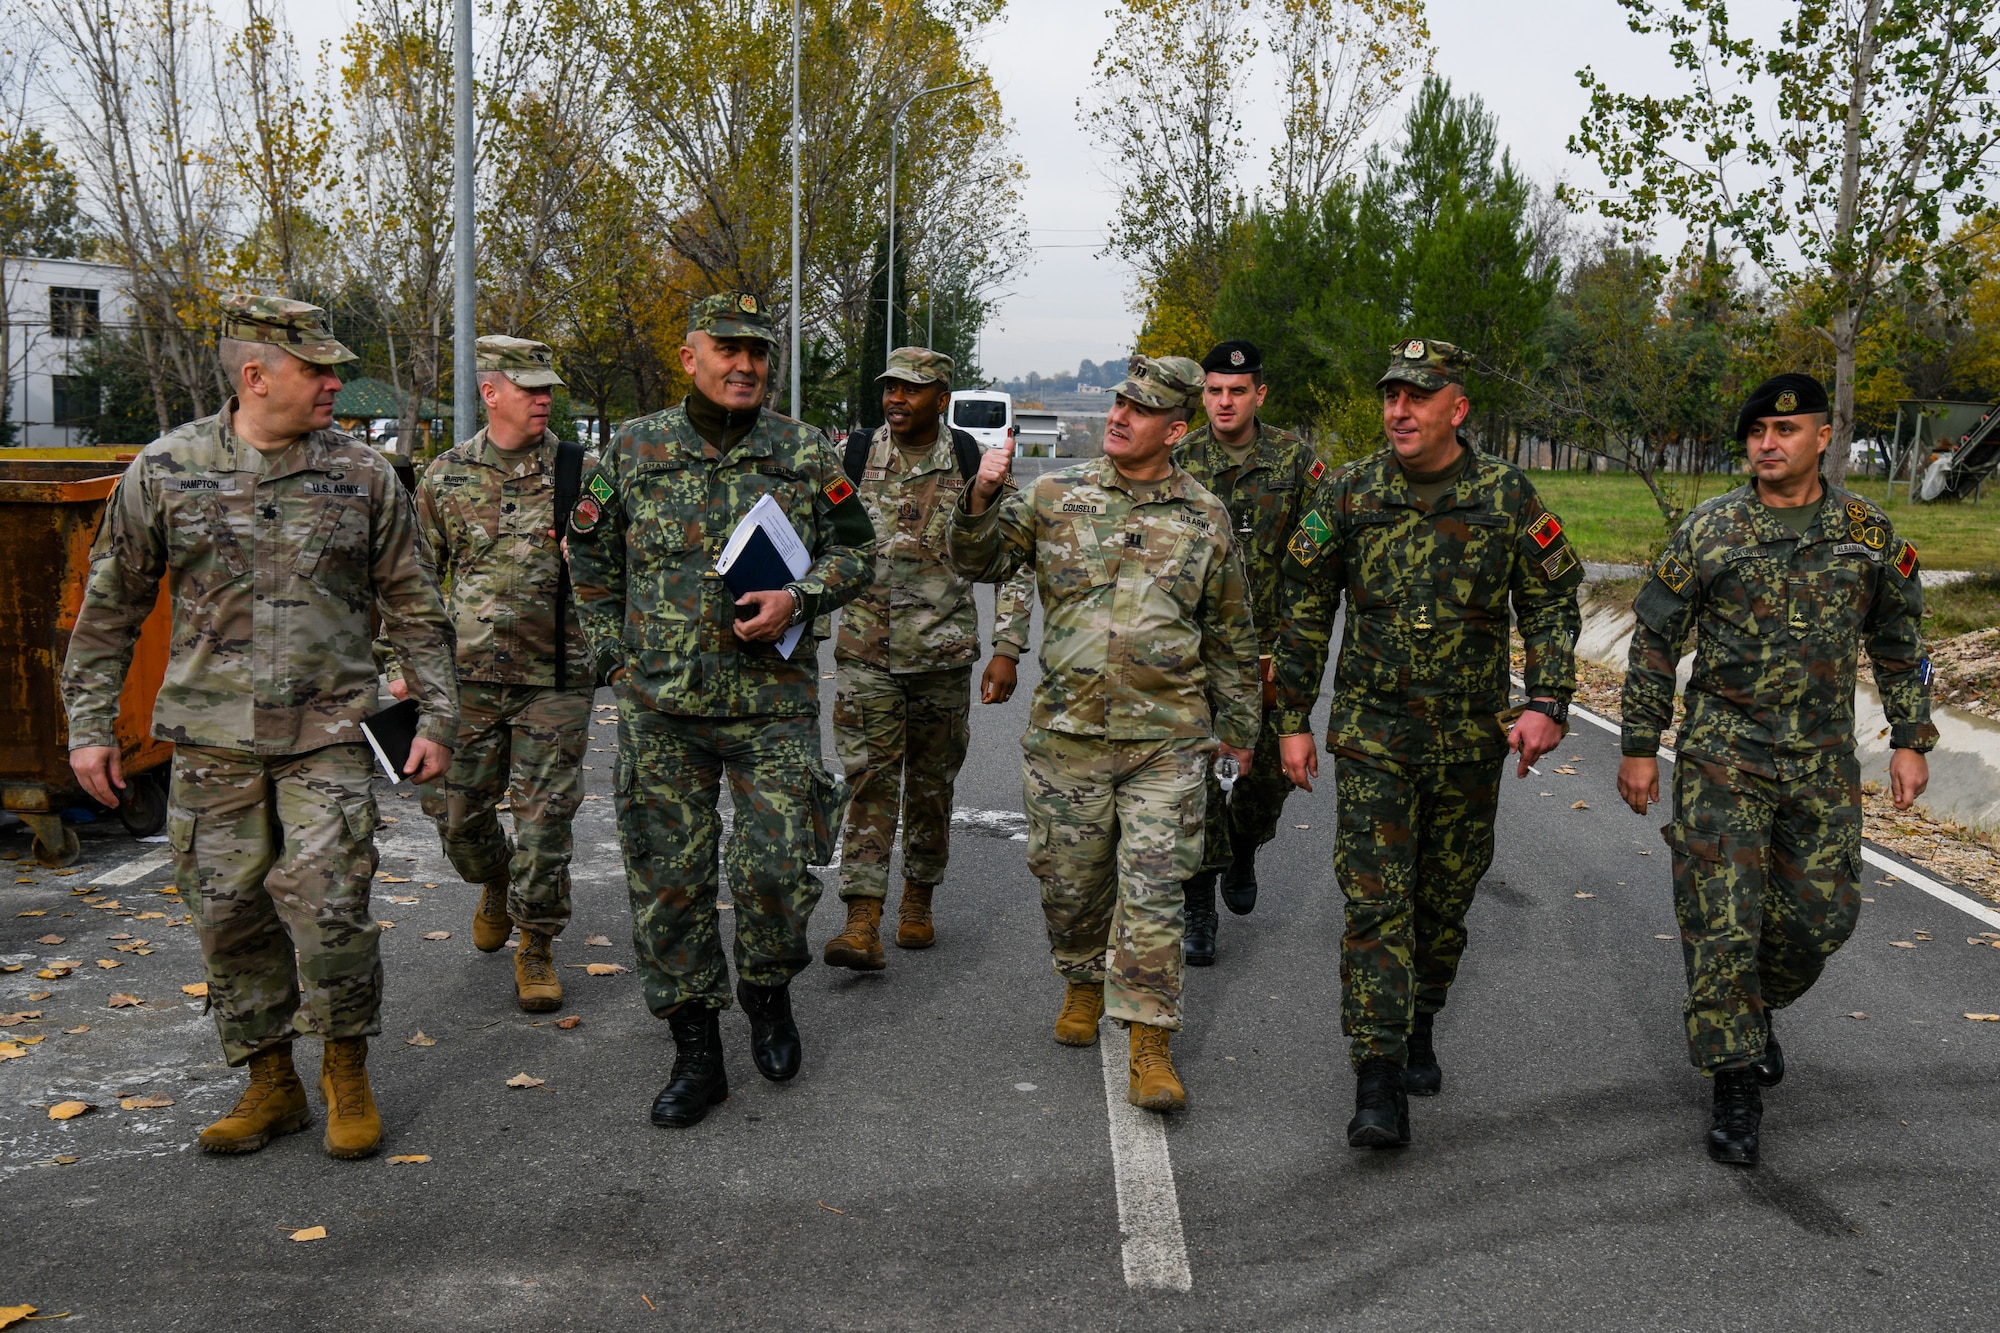 U.S. Air Force and Army service members walking and talking with Albanian Armed Forces at Land Forces Headquarters.